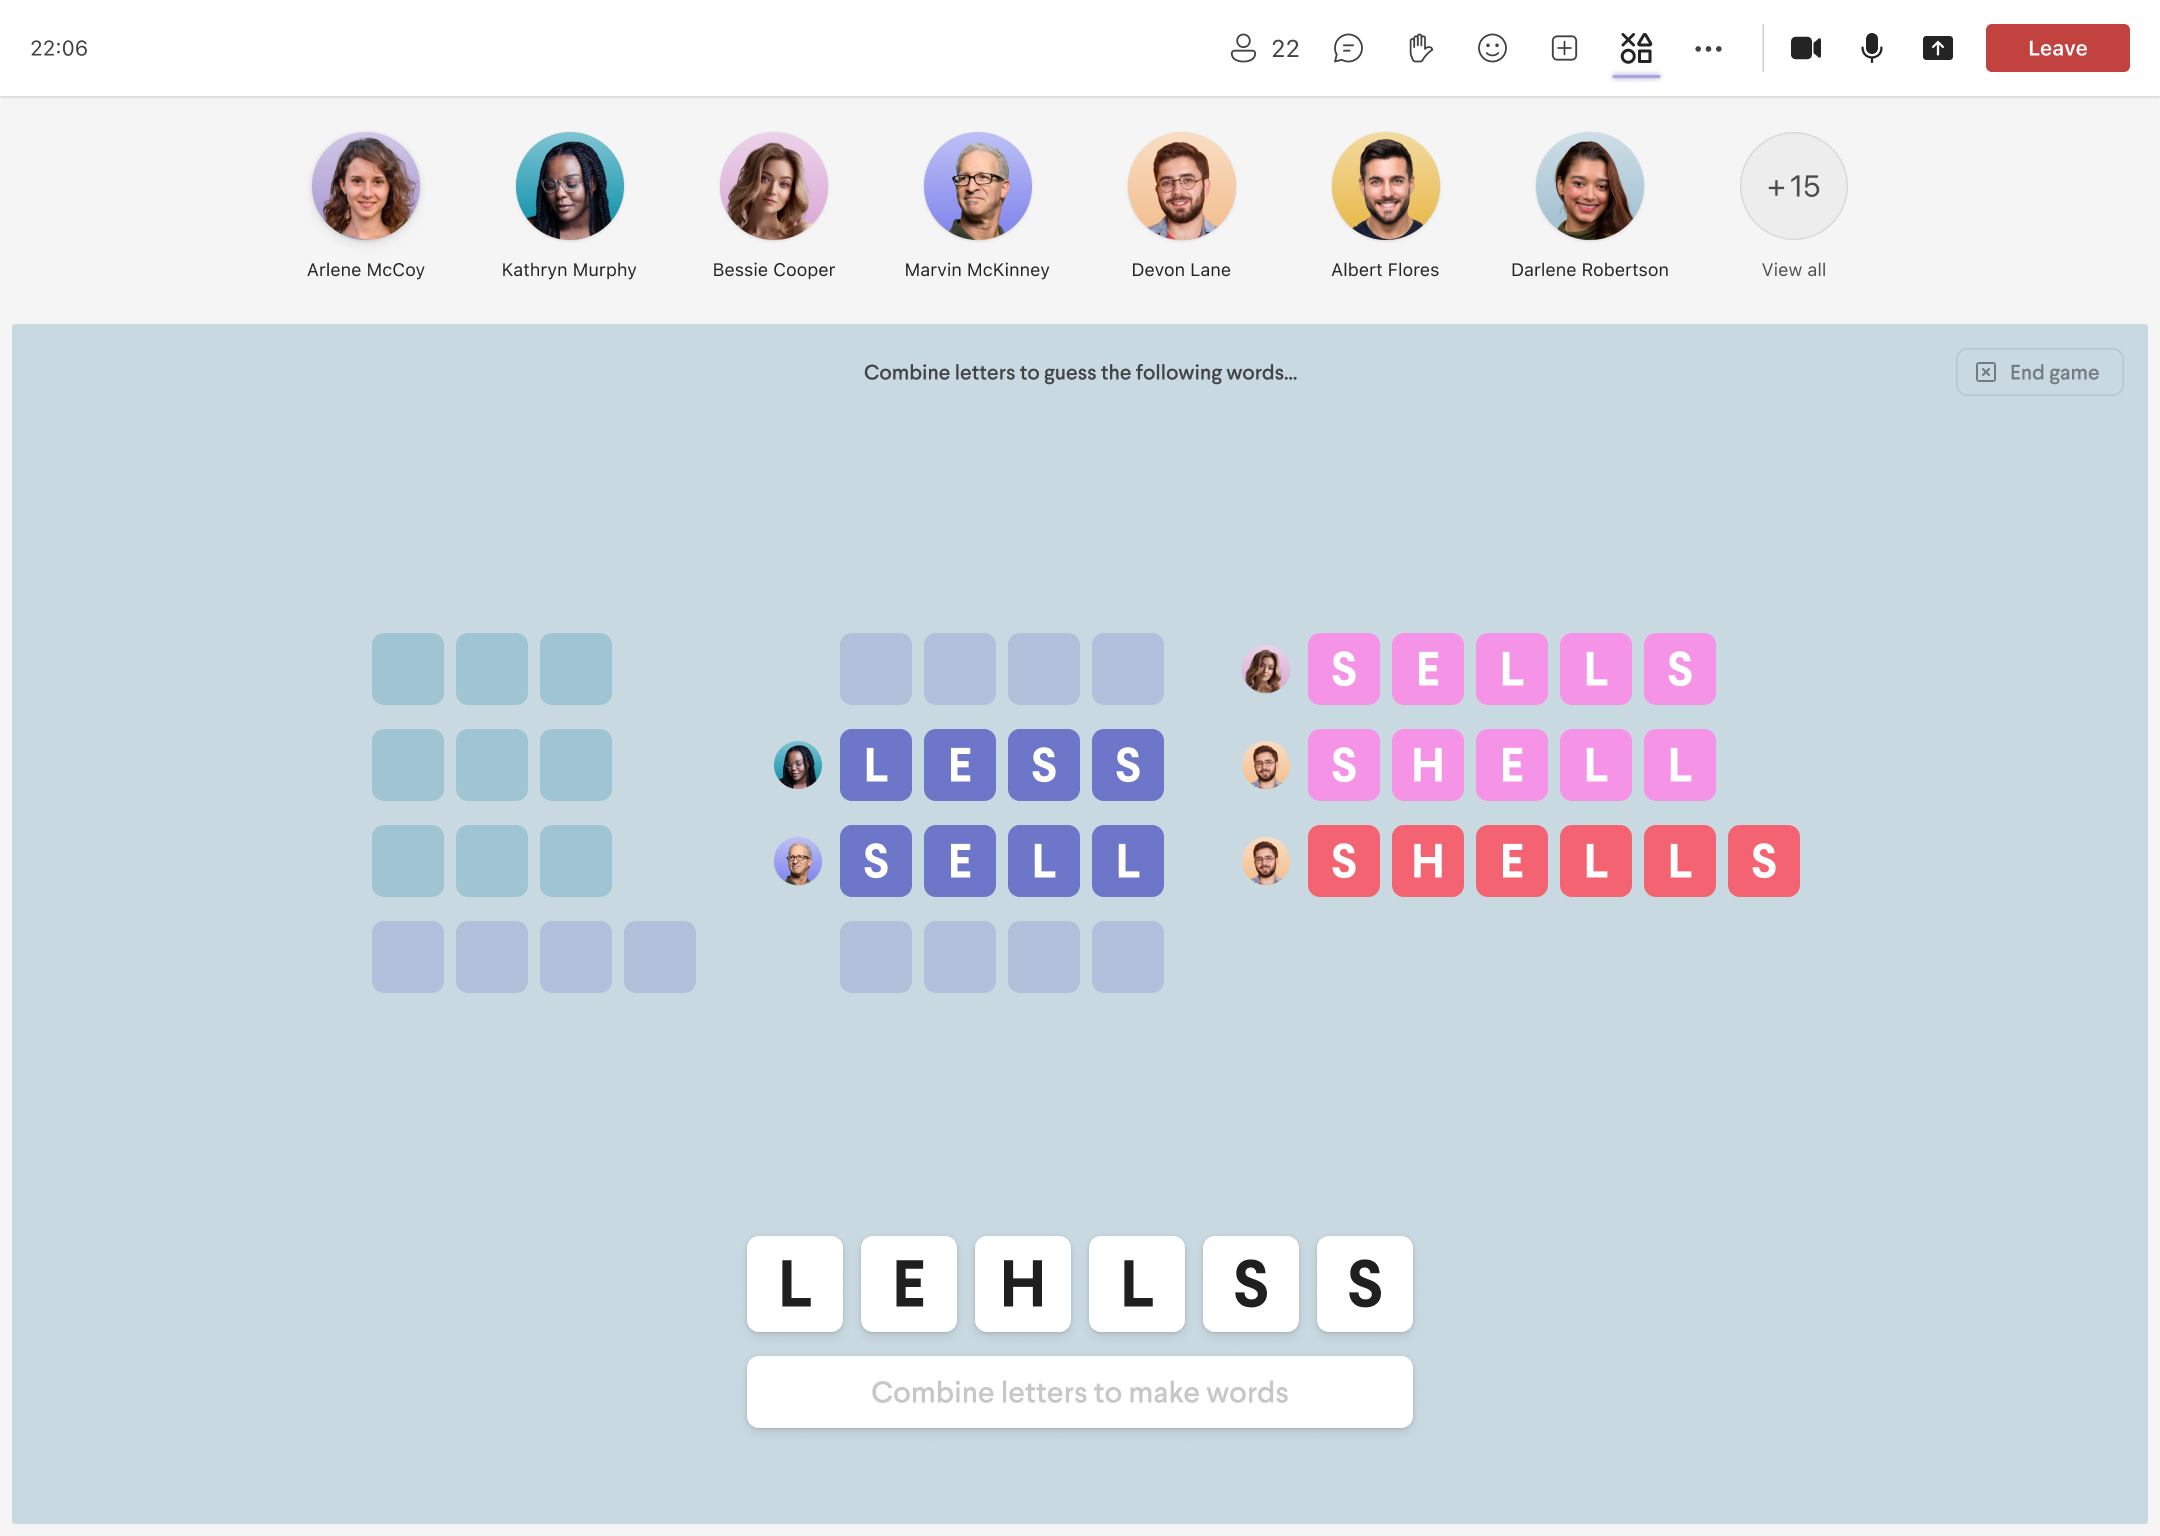 Play a collaborative word game